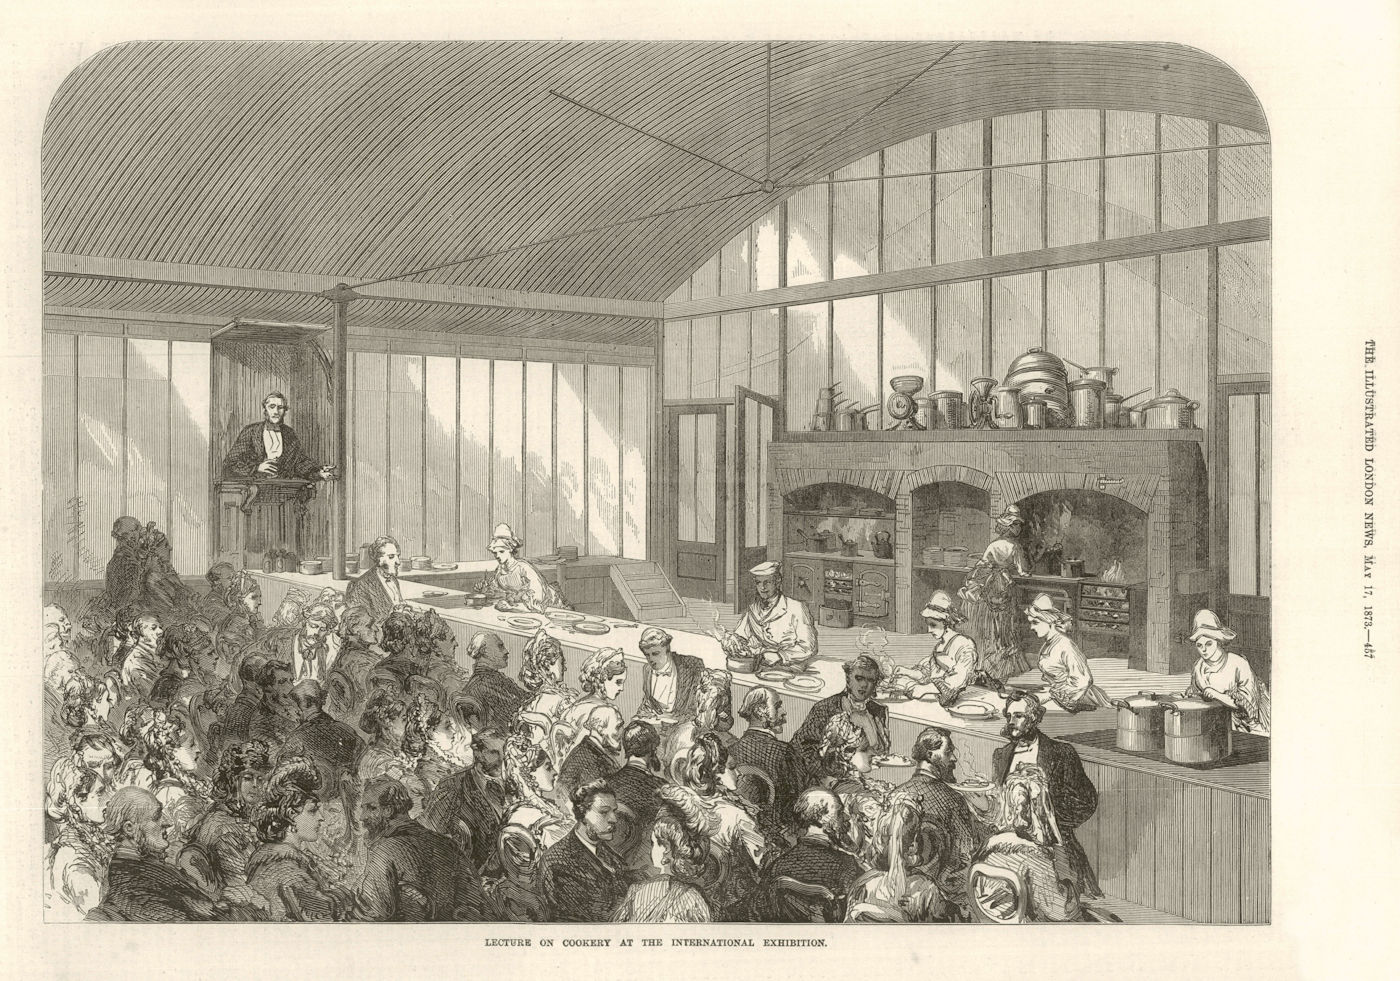 Lecture on cookery at the International Exhibition. Hospitality. London 1873